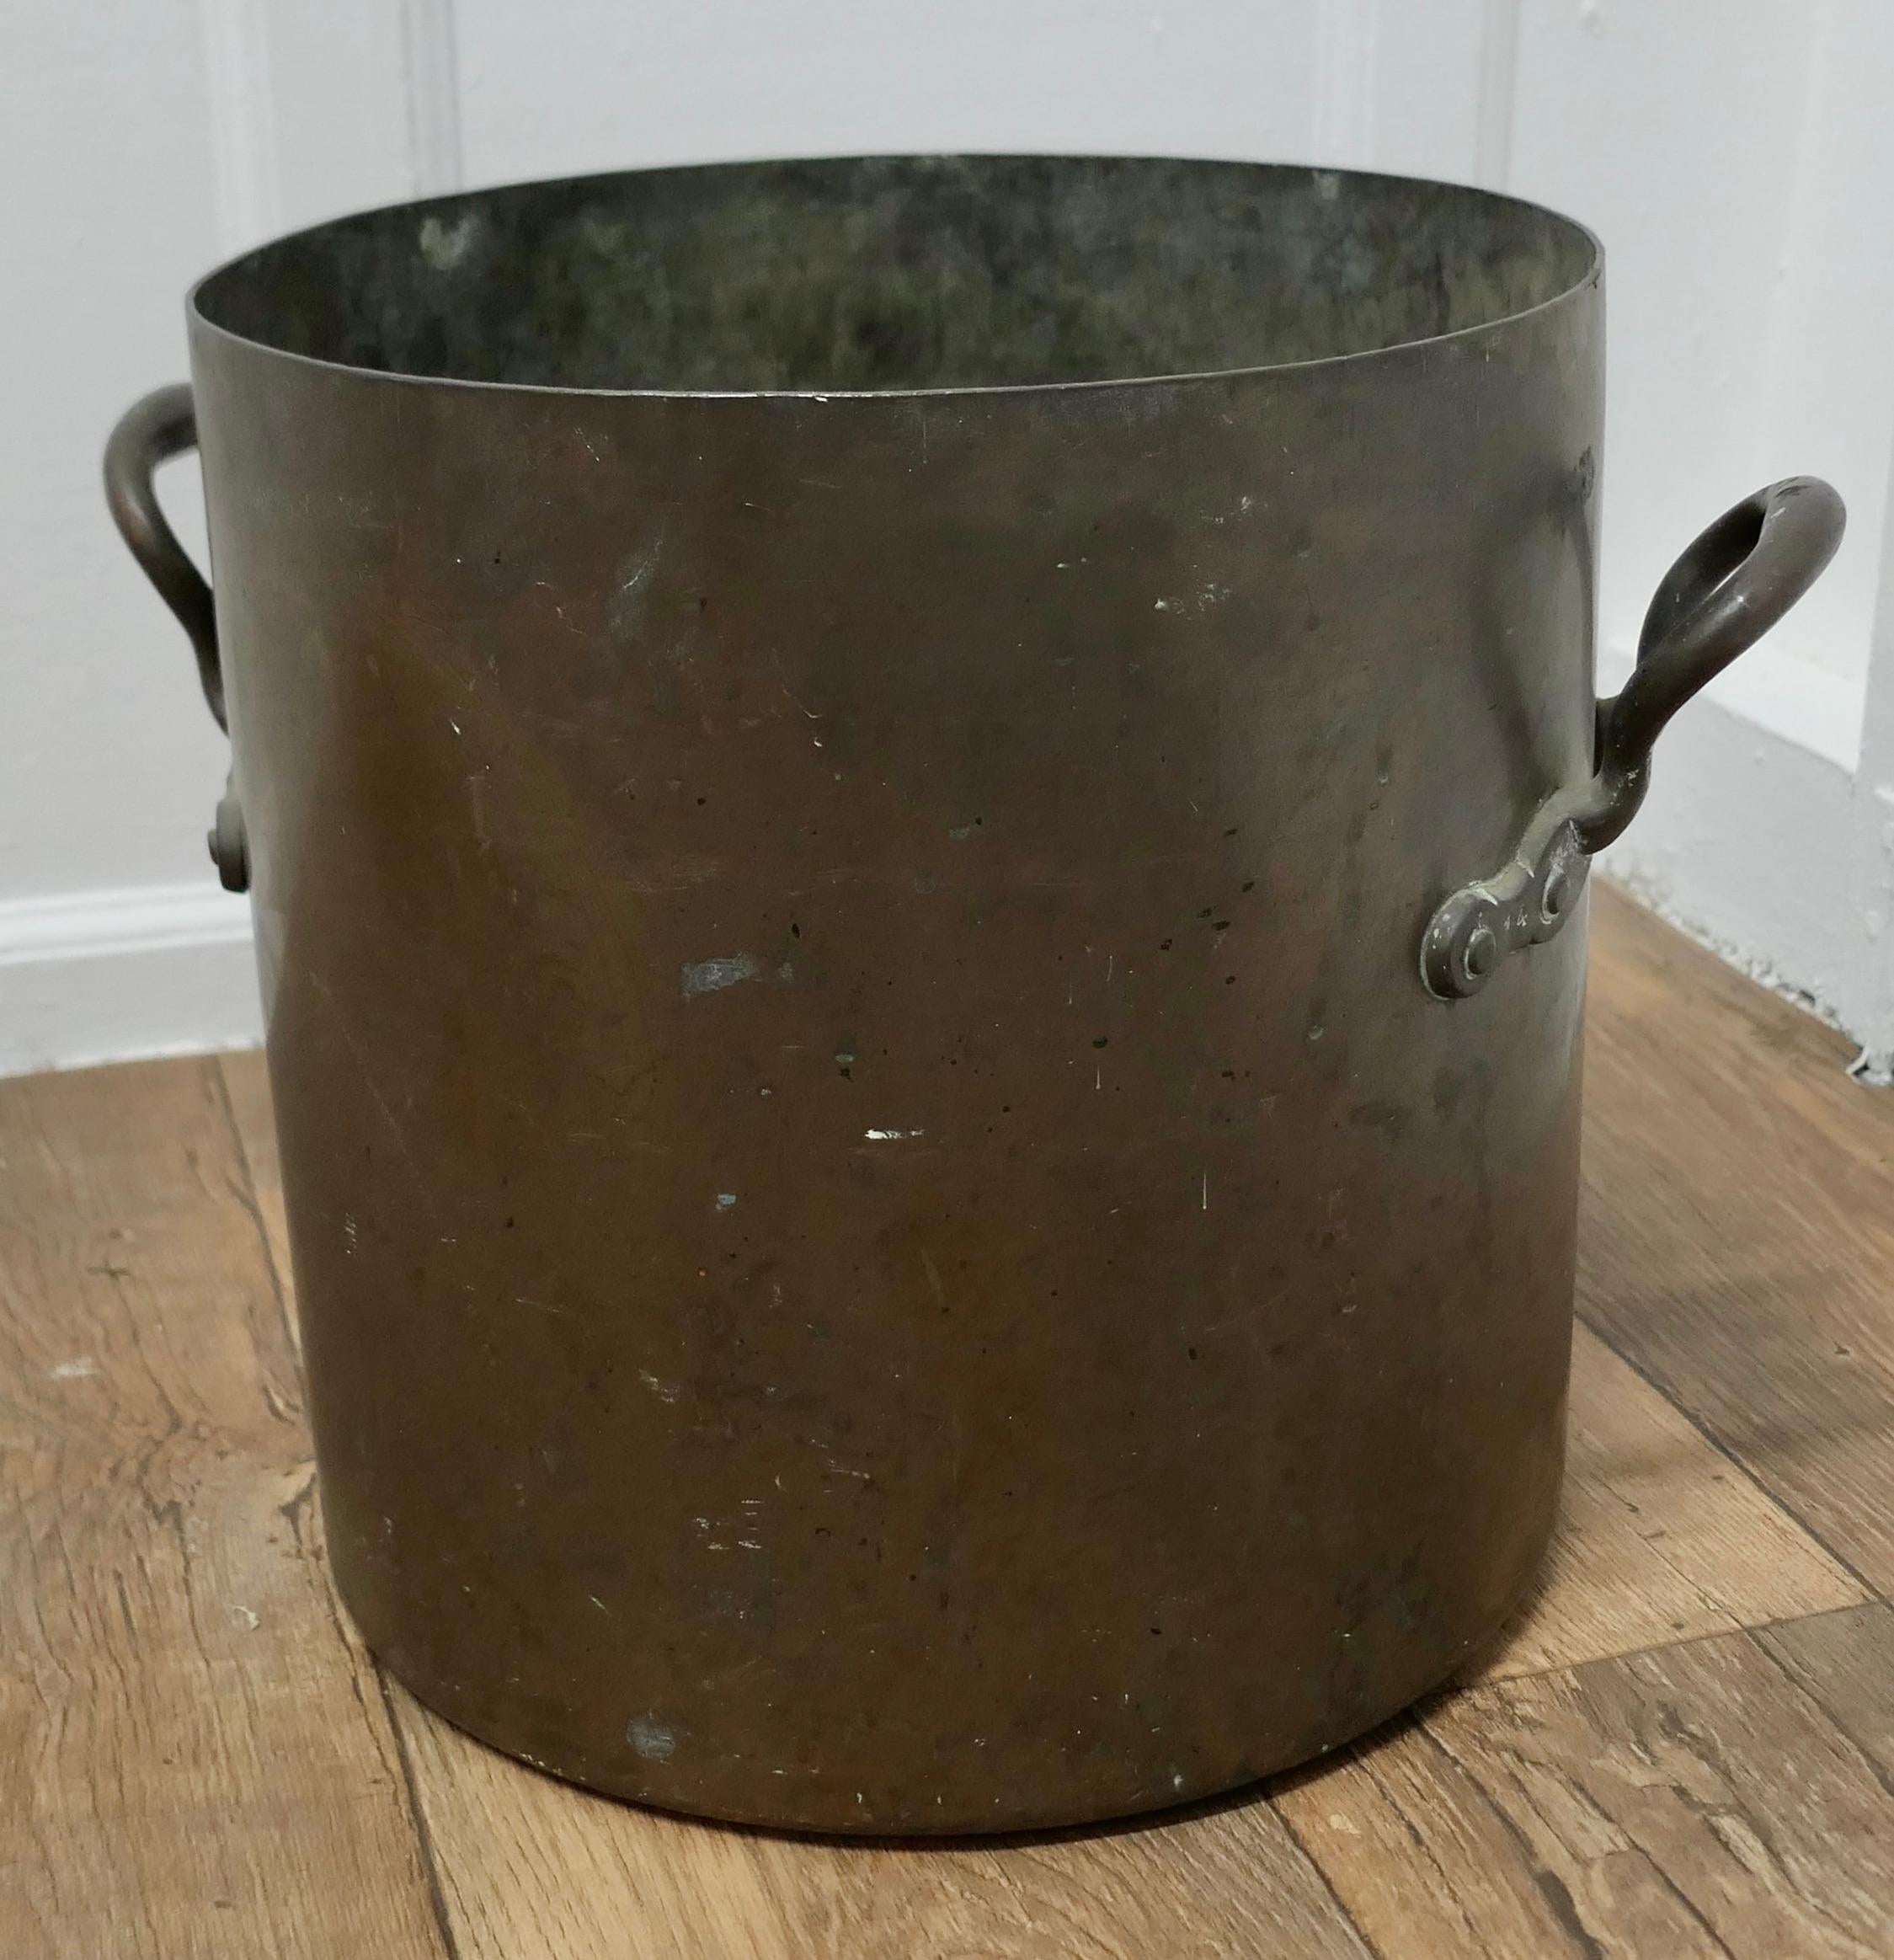 Large 19th century Tinned Copper Cooking Pot

This is a lovely looking straight sided Cooking Pot, it has L P 3 stamped on the side it has sturdy handles riveted on each side

The pot is very sound, the interior was originally tinned but is